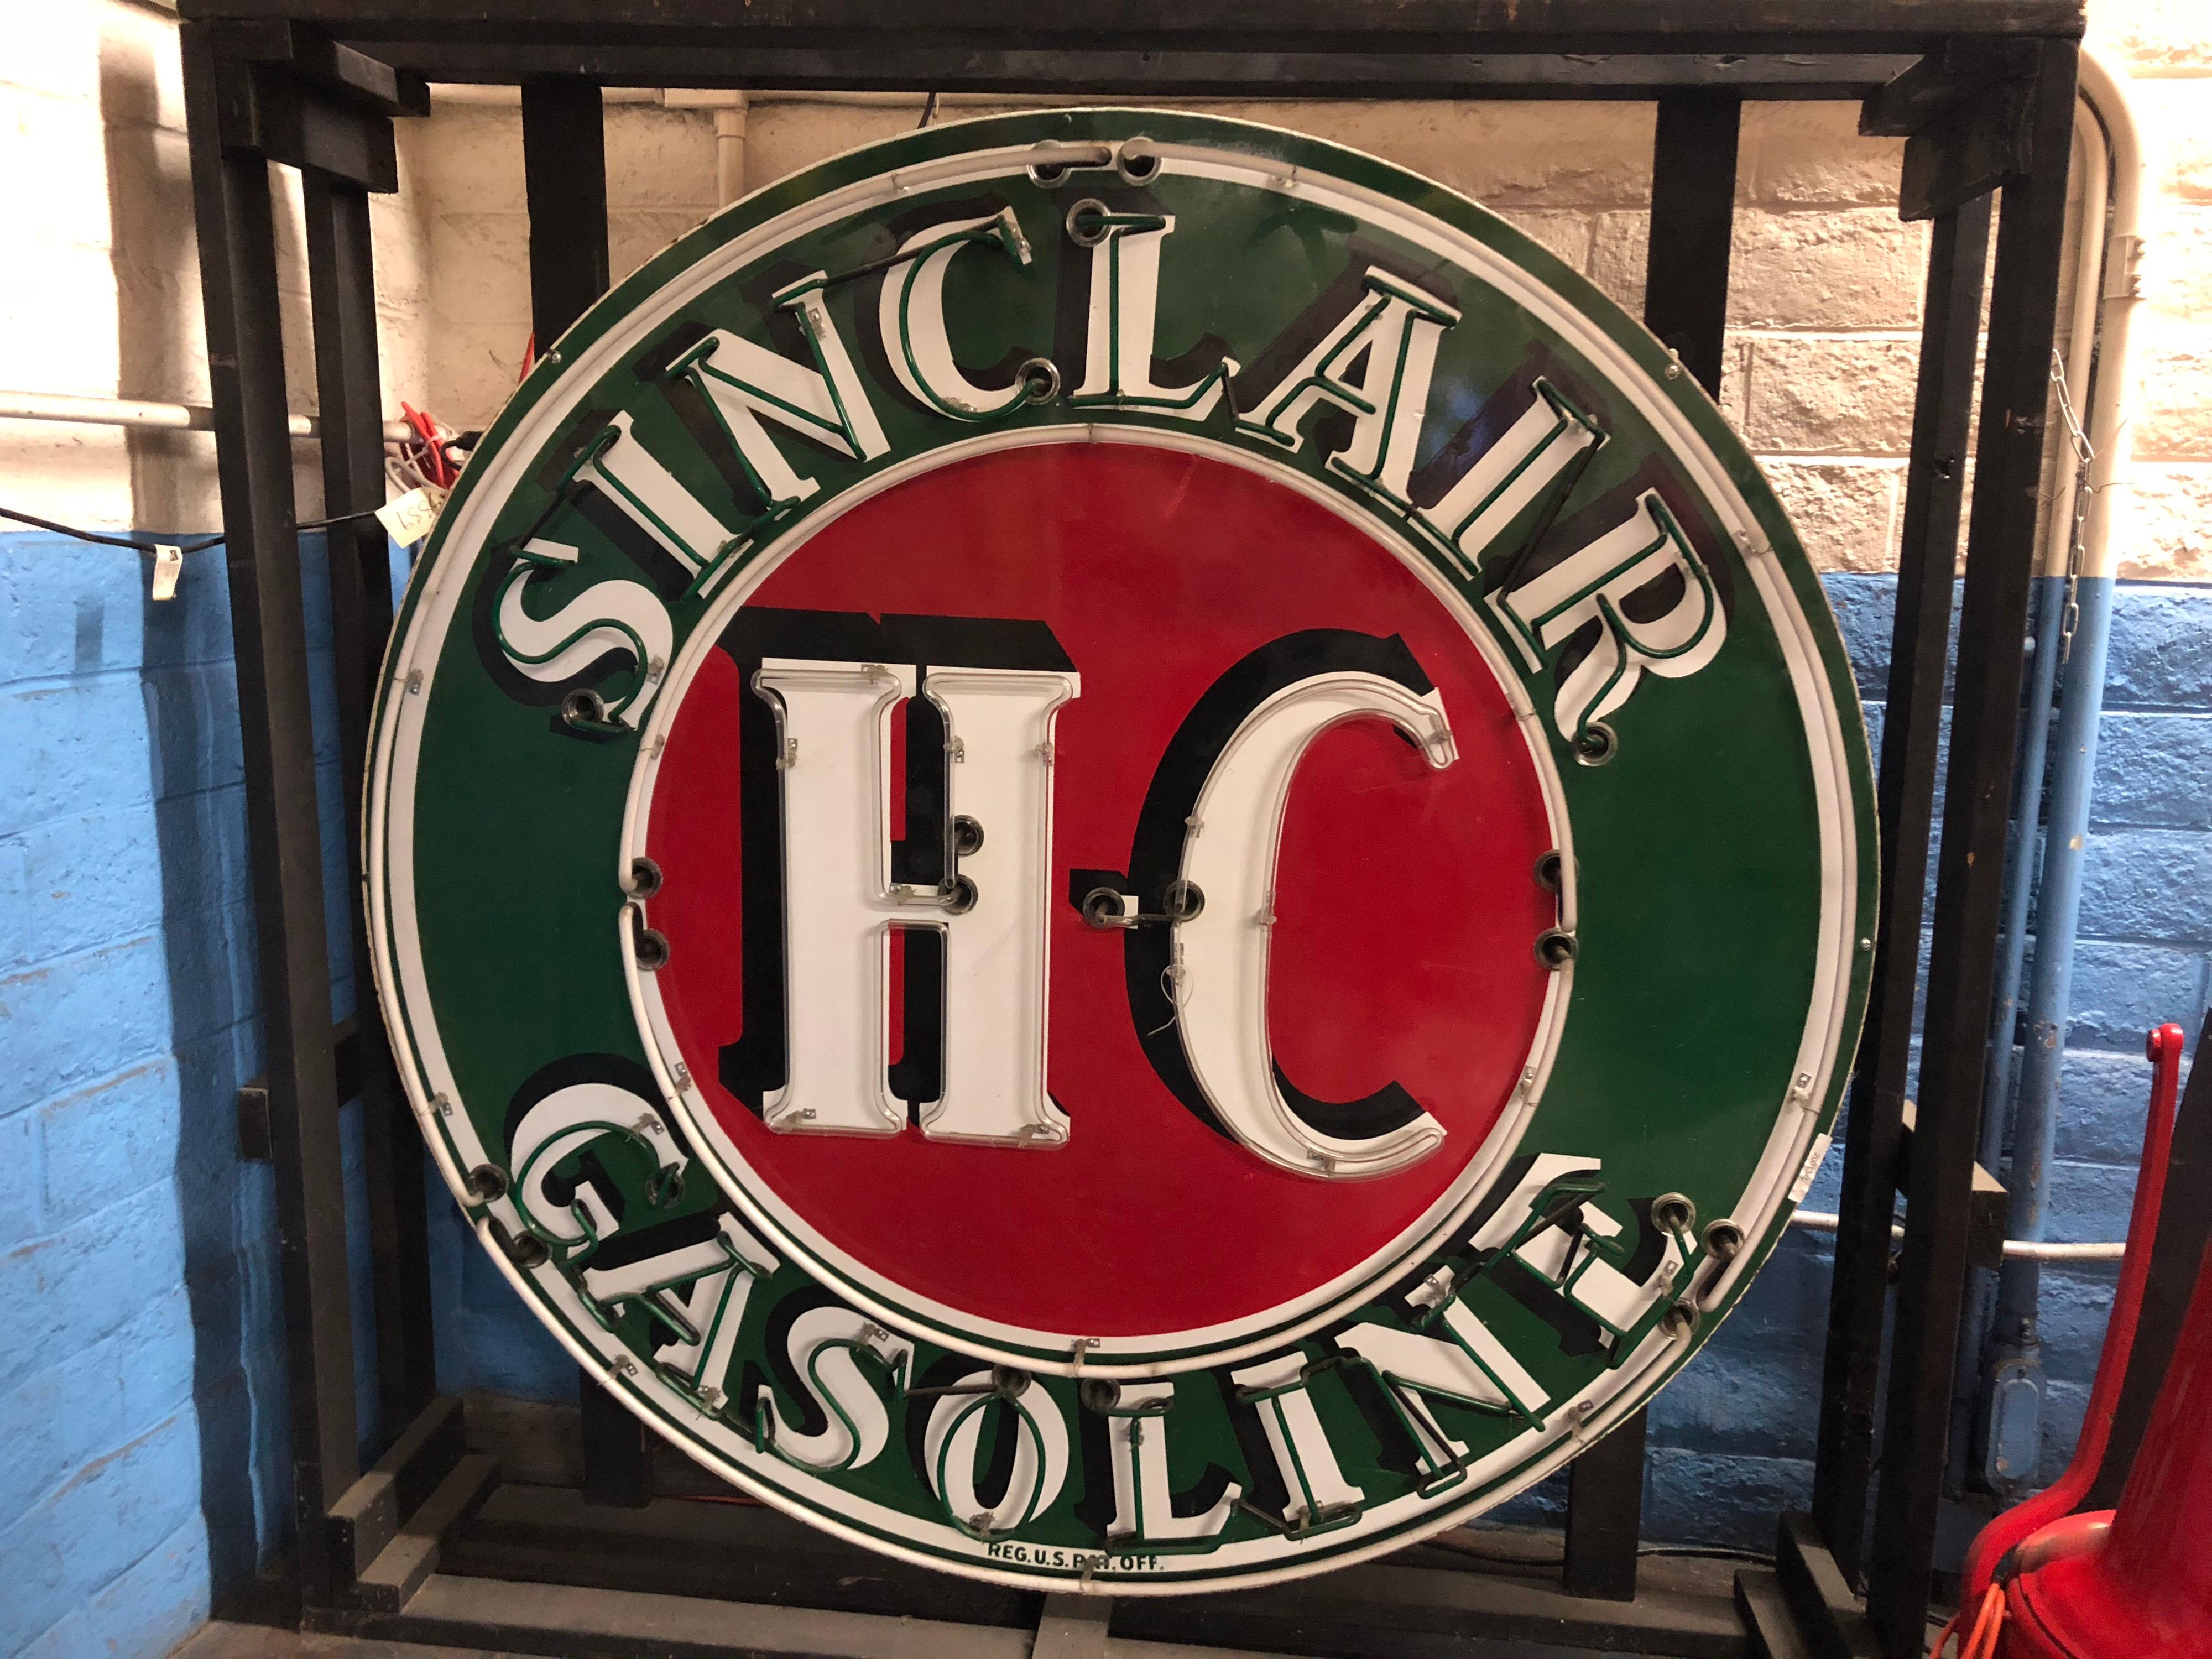 Great neon sign thats single sided porcelain. Sinclair's first super-fuel is marketed in 1926. The “HC” initials stand for “Houston Concentrate,” but some advertising men prefer the term “High Compression.” With $50 million in assets, Harry Ford